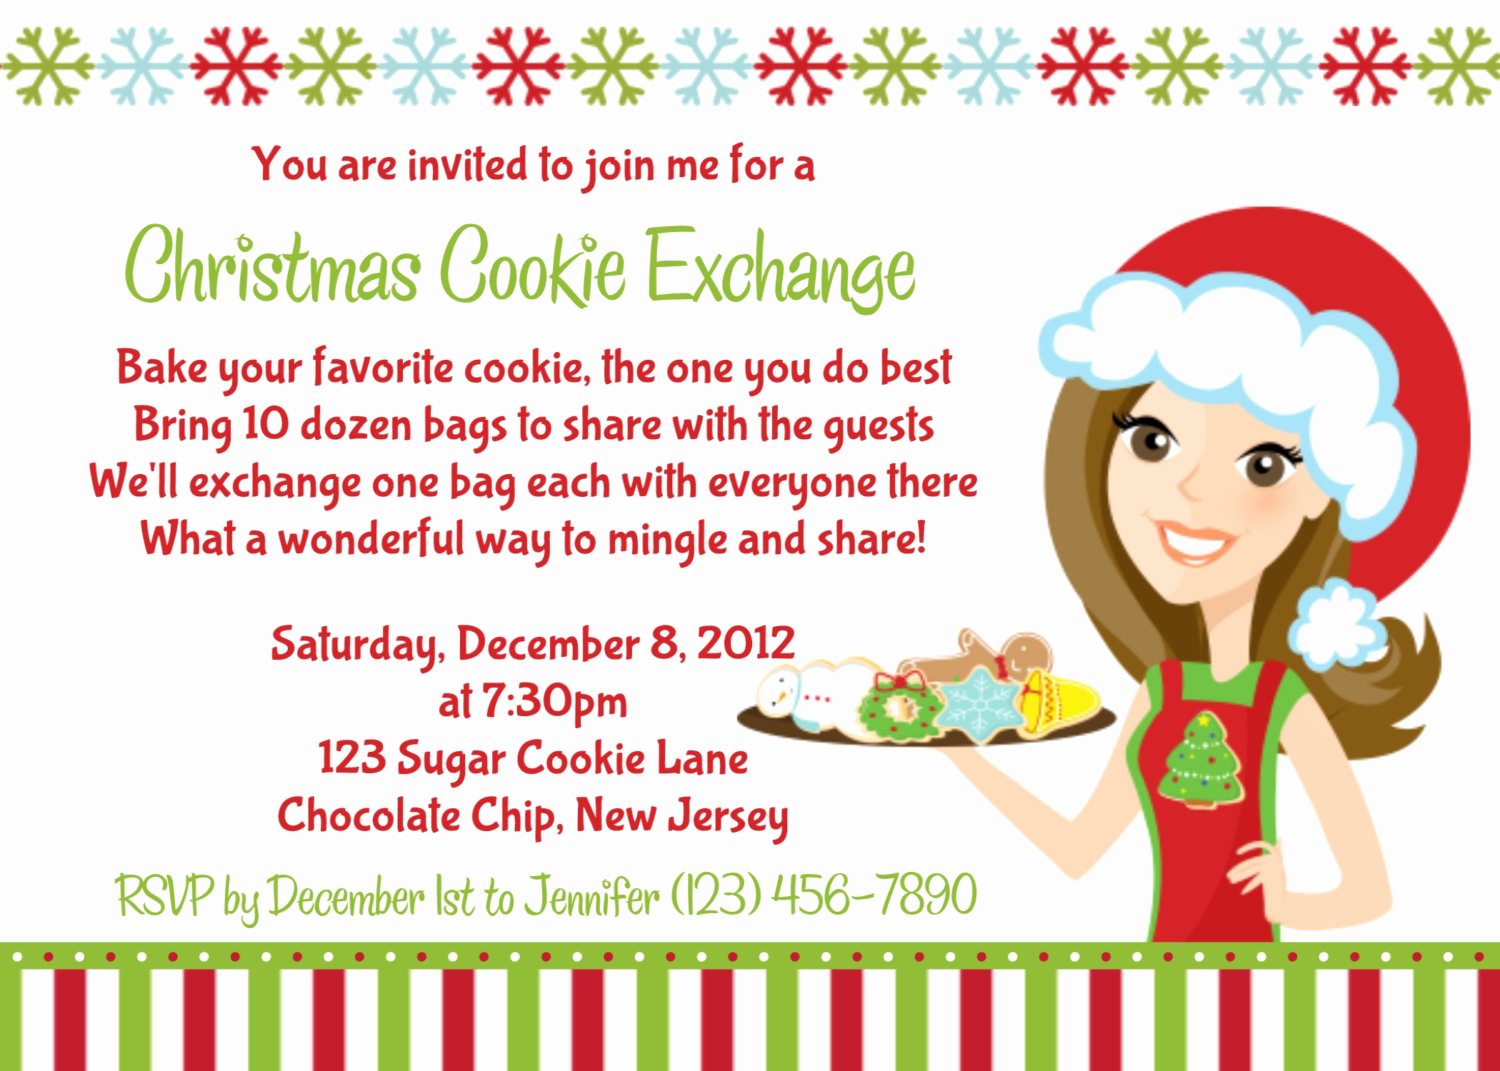 Cookie Exchange Invitation Wording Unique Starts with Cupcakes An American Tradition